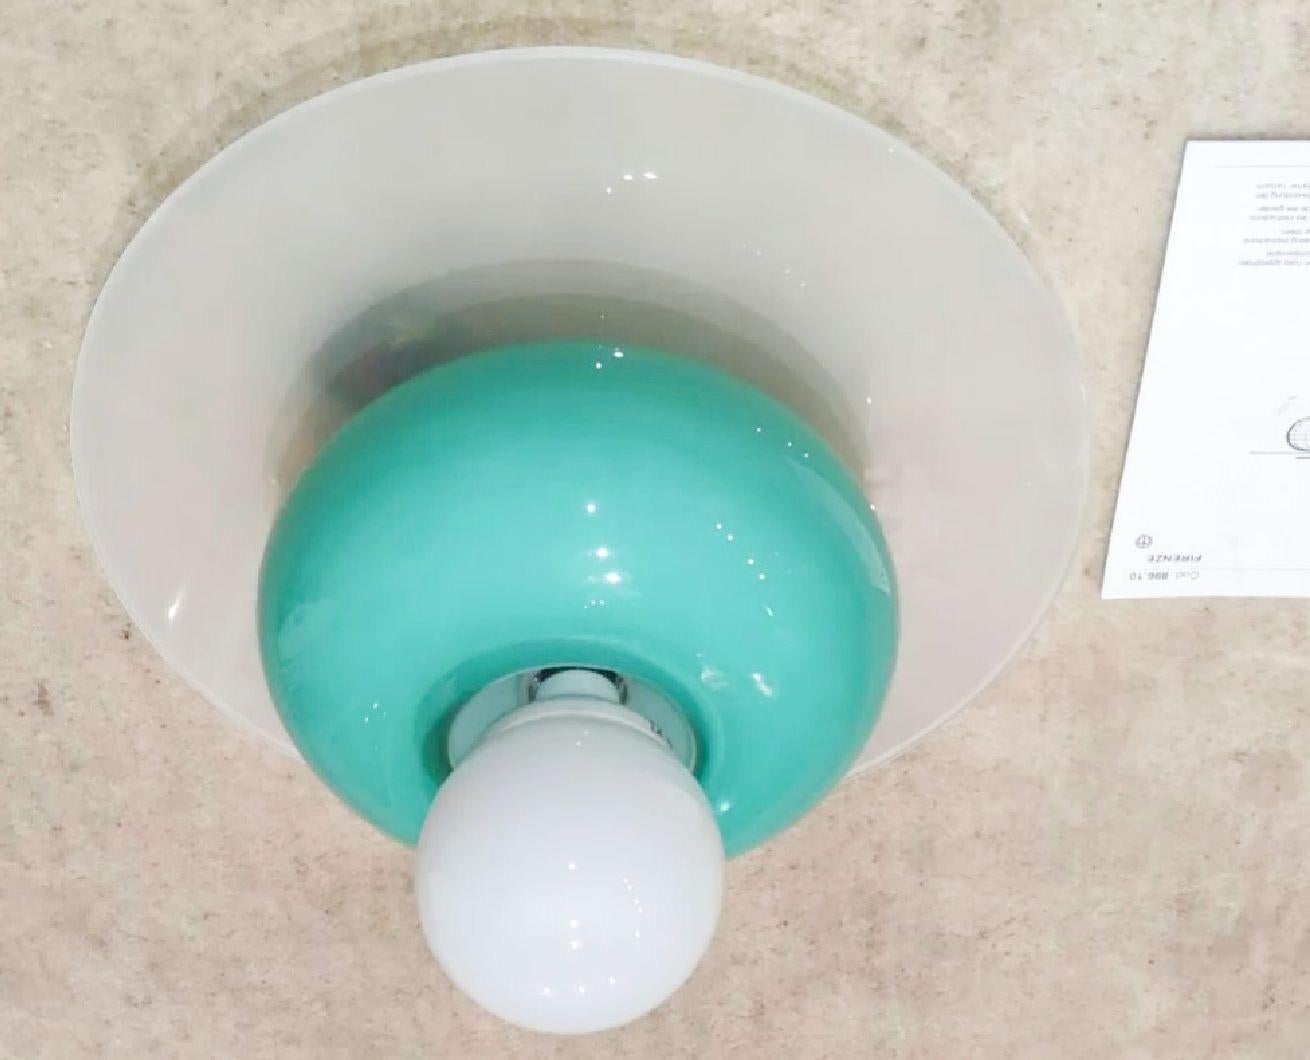 Ettore Sotsass for Venini Murano Firenze fresh teal art glass flush light fixture, 1995. Signed and dated. Original production.  Comes with installation booklet and screws. 